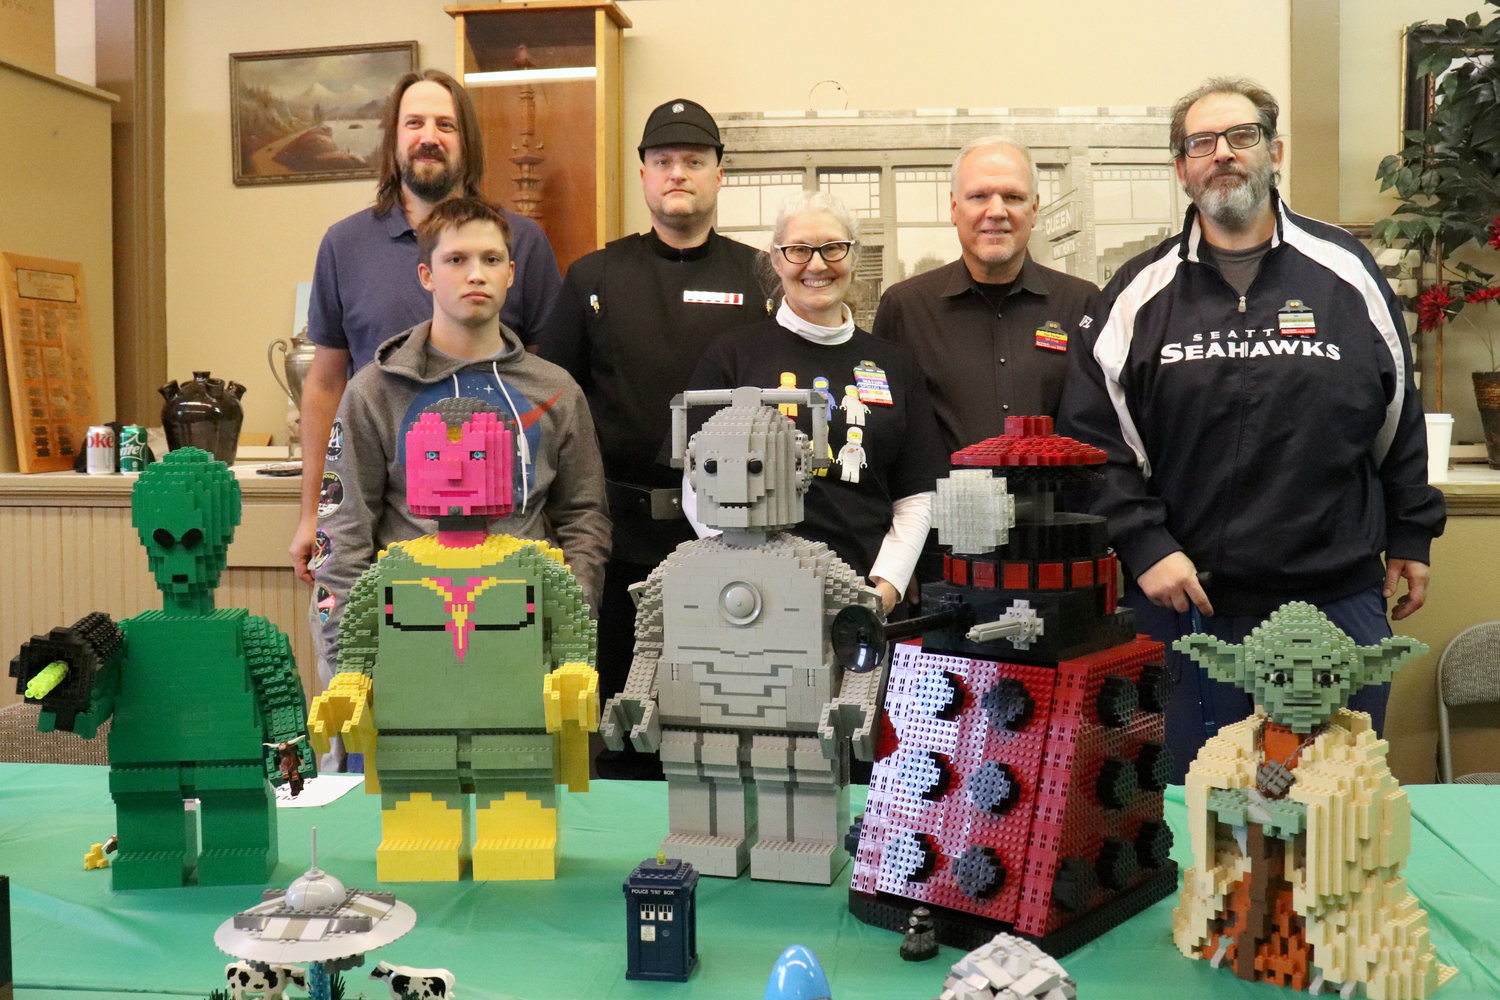 South Puget Sound Lego Users Group members, from left, Joshua Gay, Brodie James-Gay, Steve Kross, Diane Campbell, Dan Parker and Eric Law, pose behind their LEGO creations on display at the Lewis County Historical Museum during the Chehalis Flying Saucer Party on Saturday. The large figurines were built by Parker. For more information on the group, visit https://spslug.org.